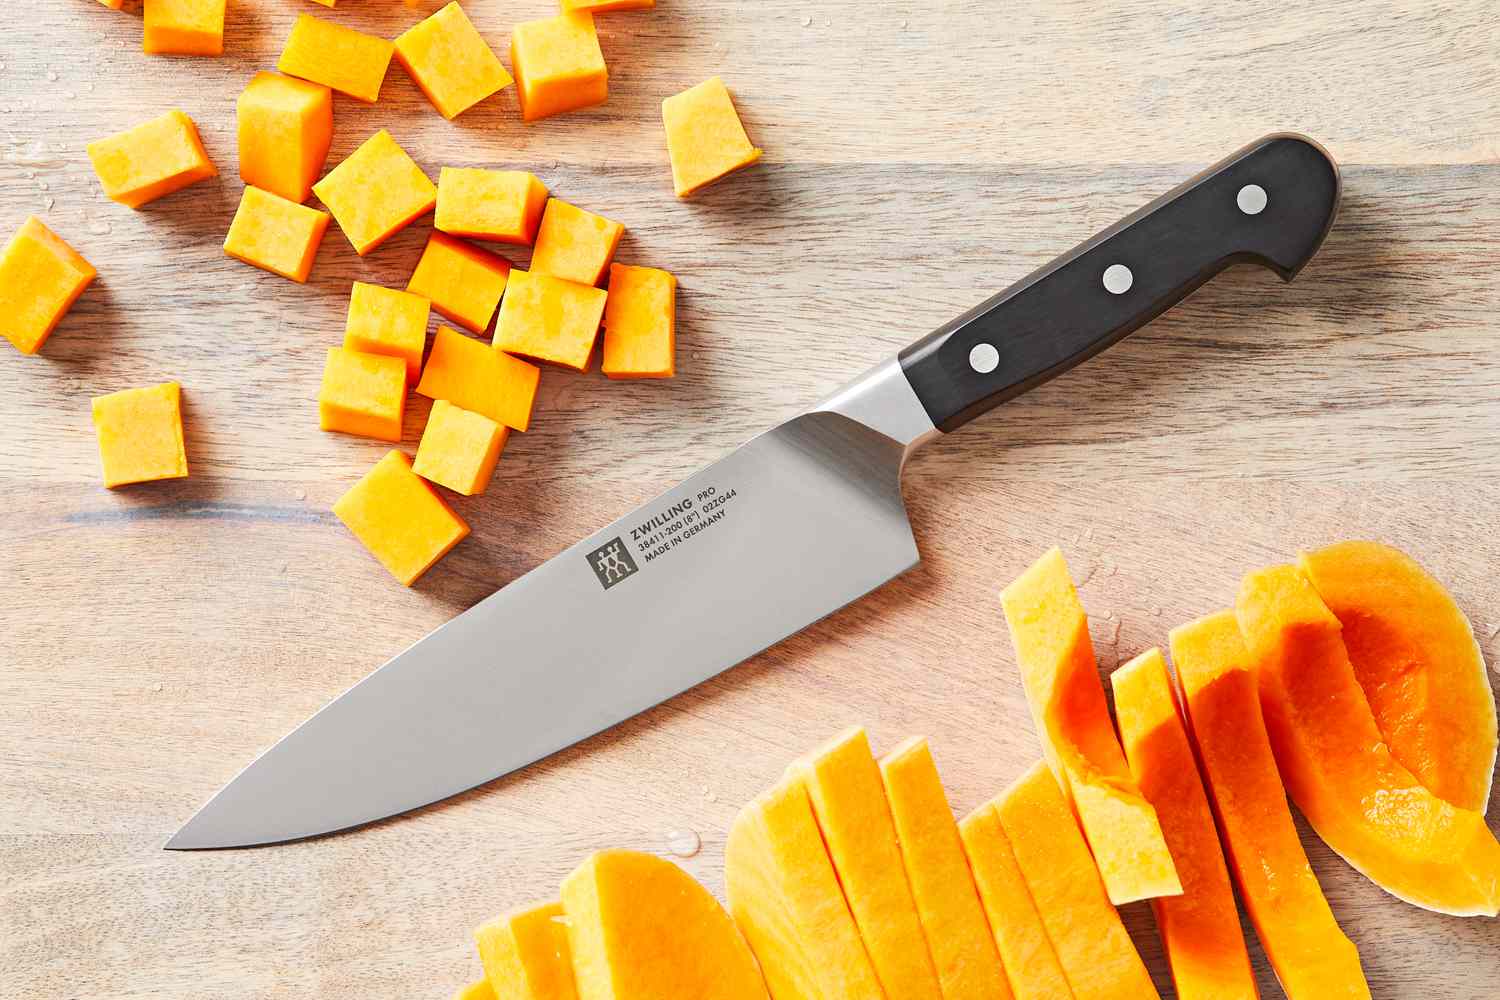 Budget-Friendly or Top-of-the-Line? Selecting the Perfect Chef’s Knife